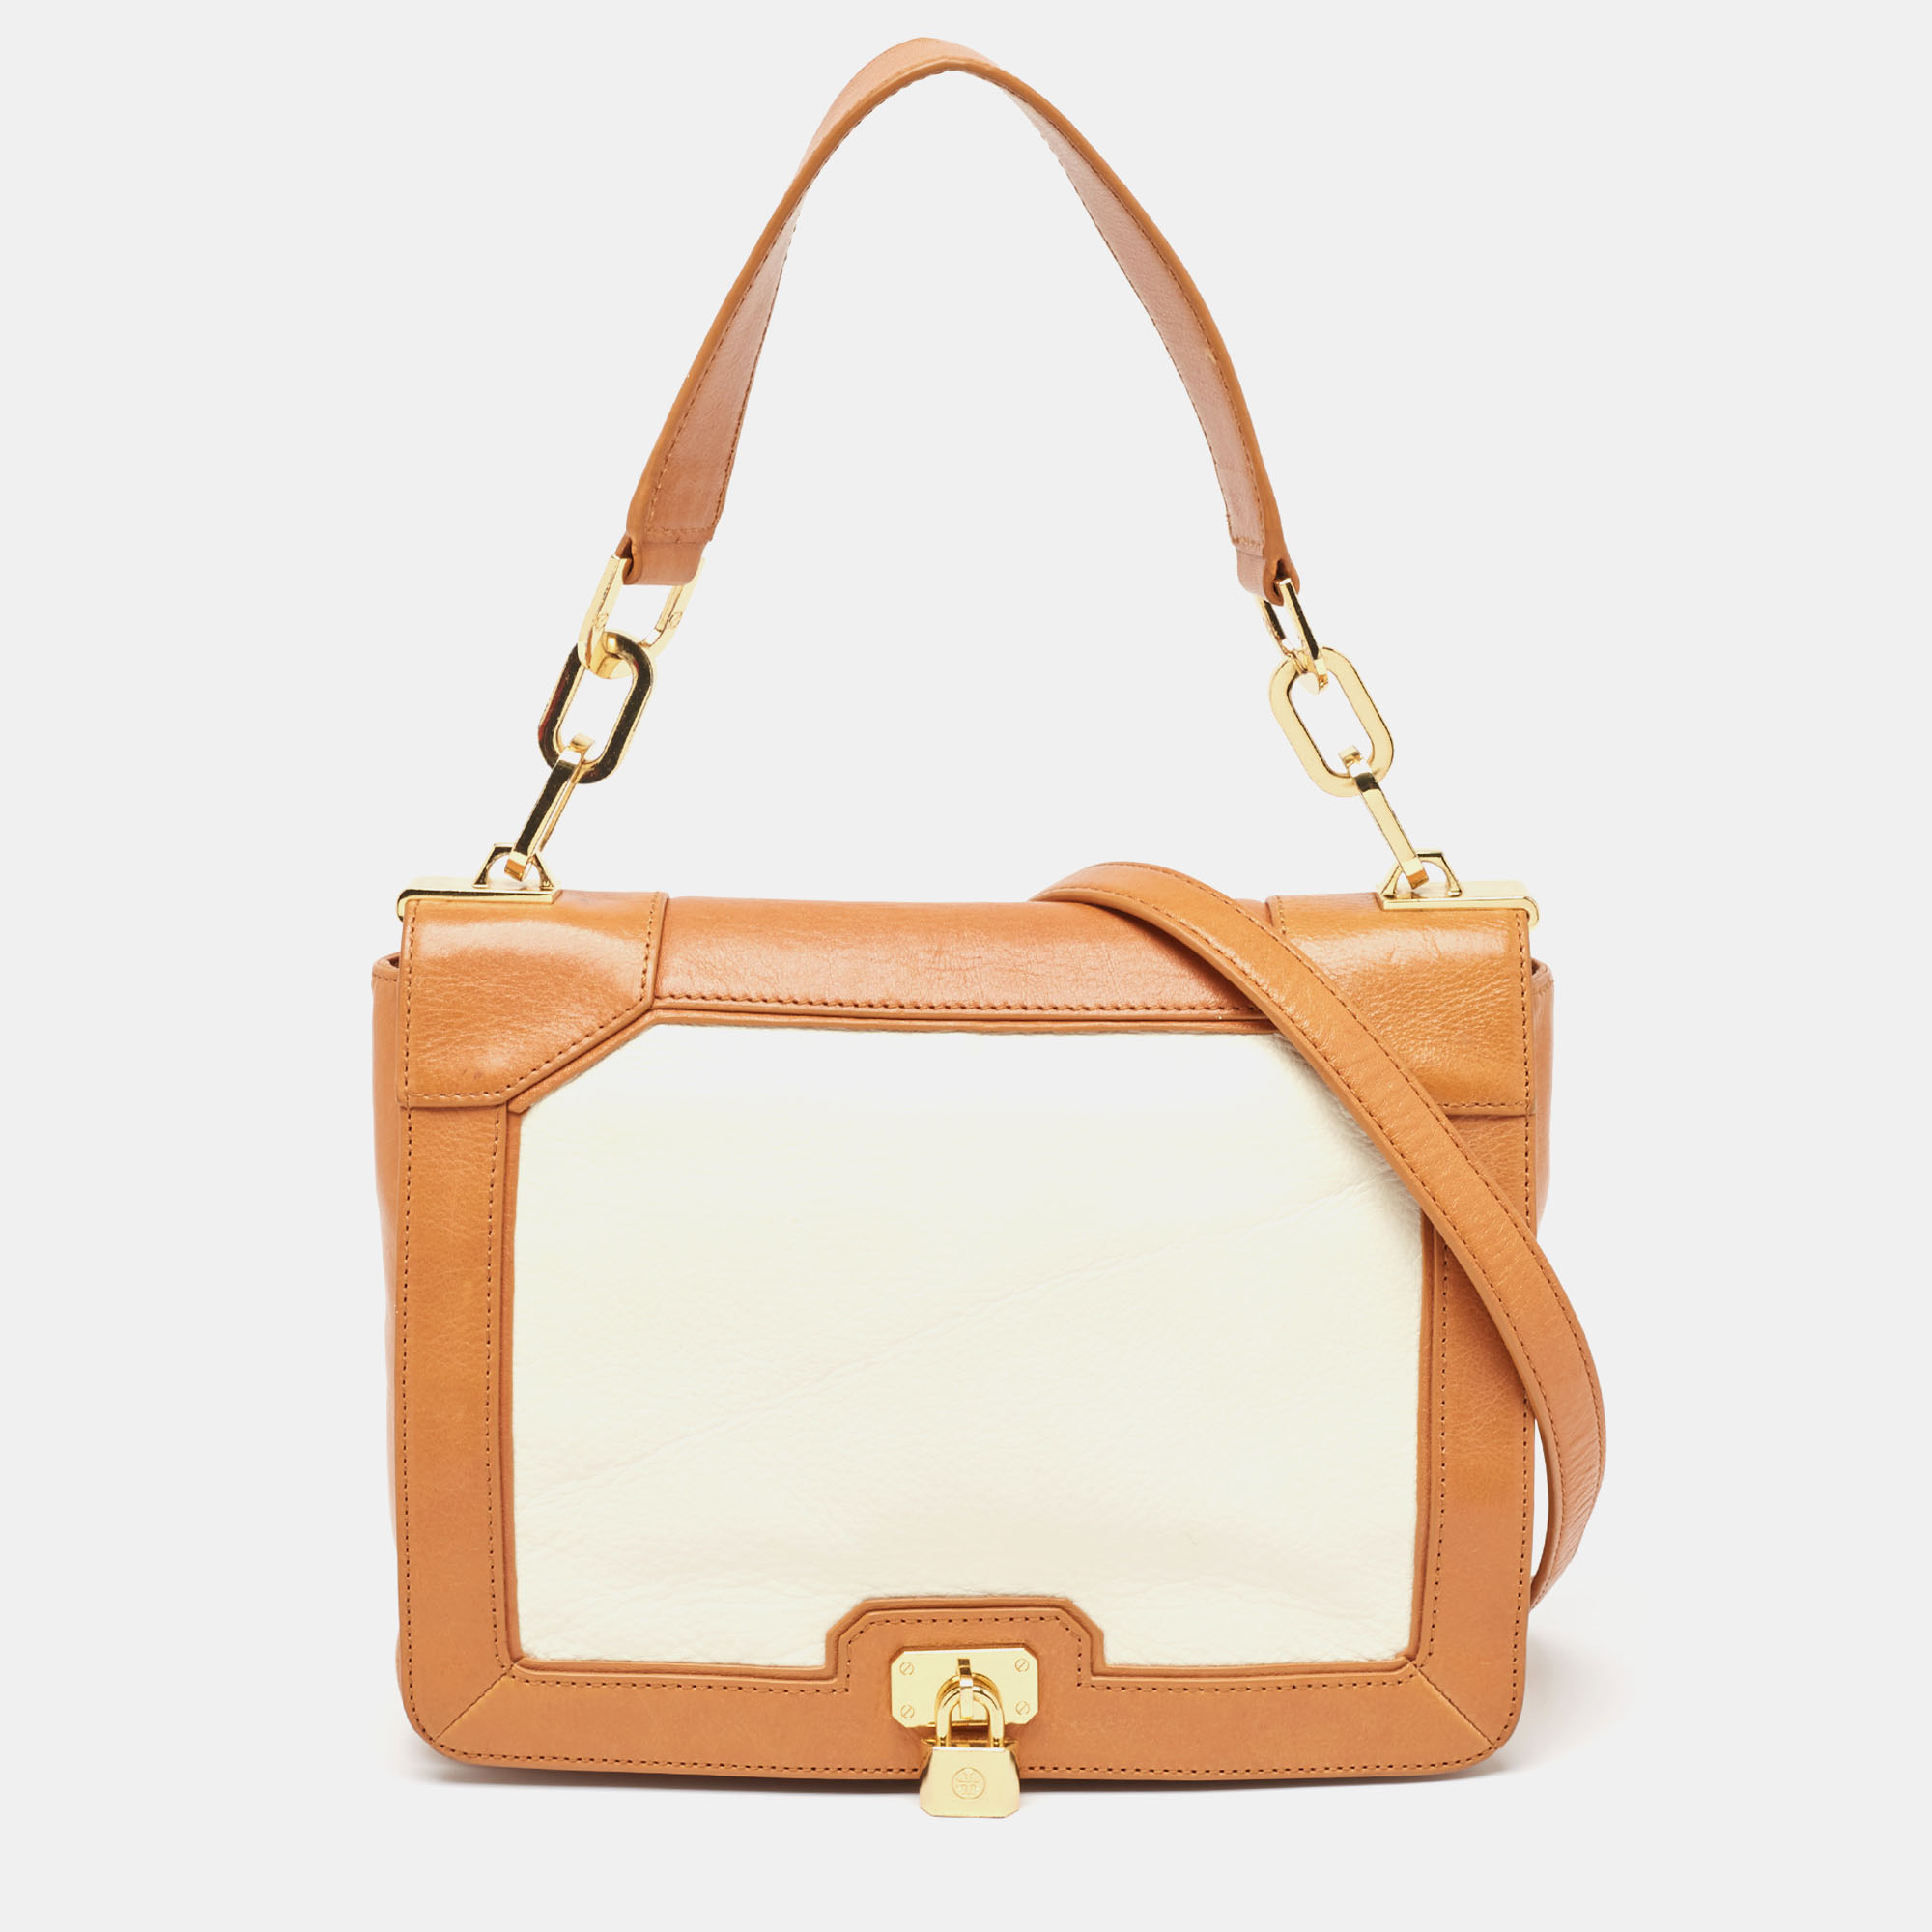 

Tory Burch Tan/Off White Leather Lock Flap Shoulder Bag